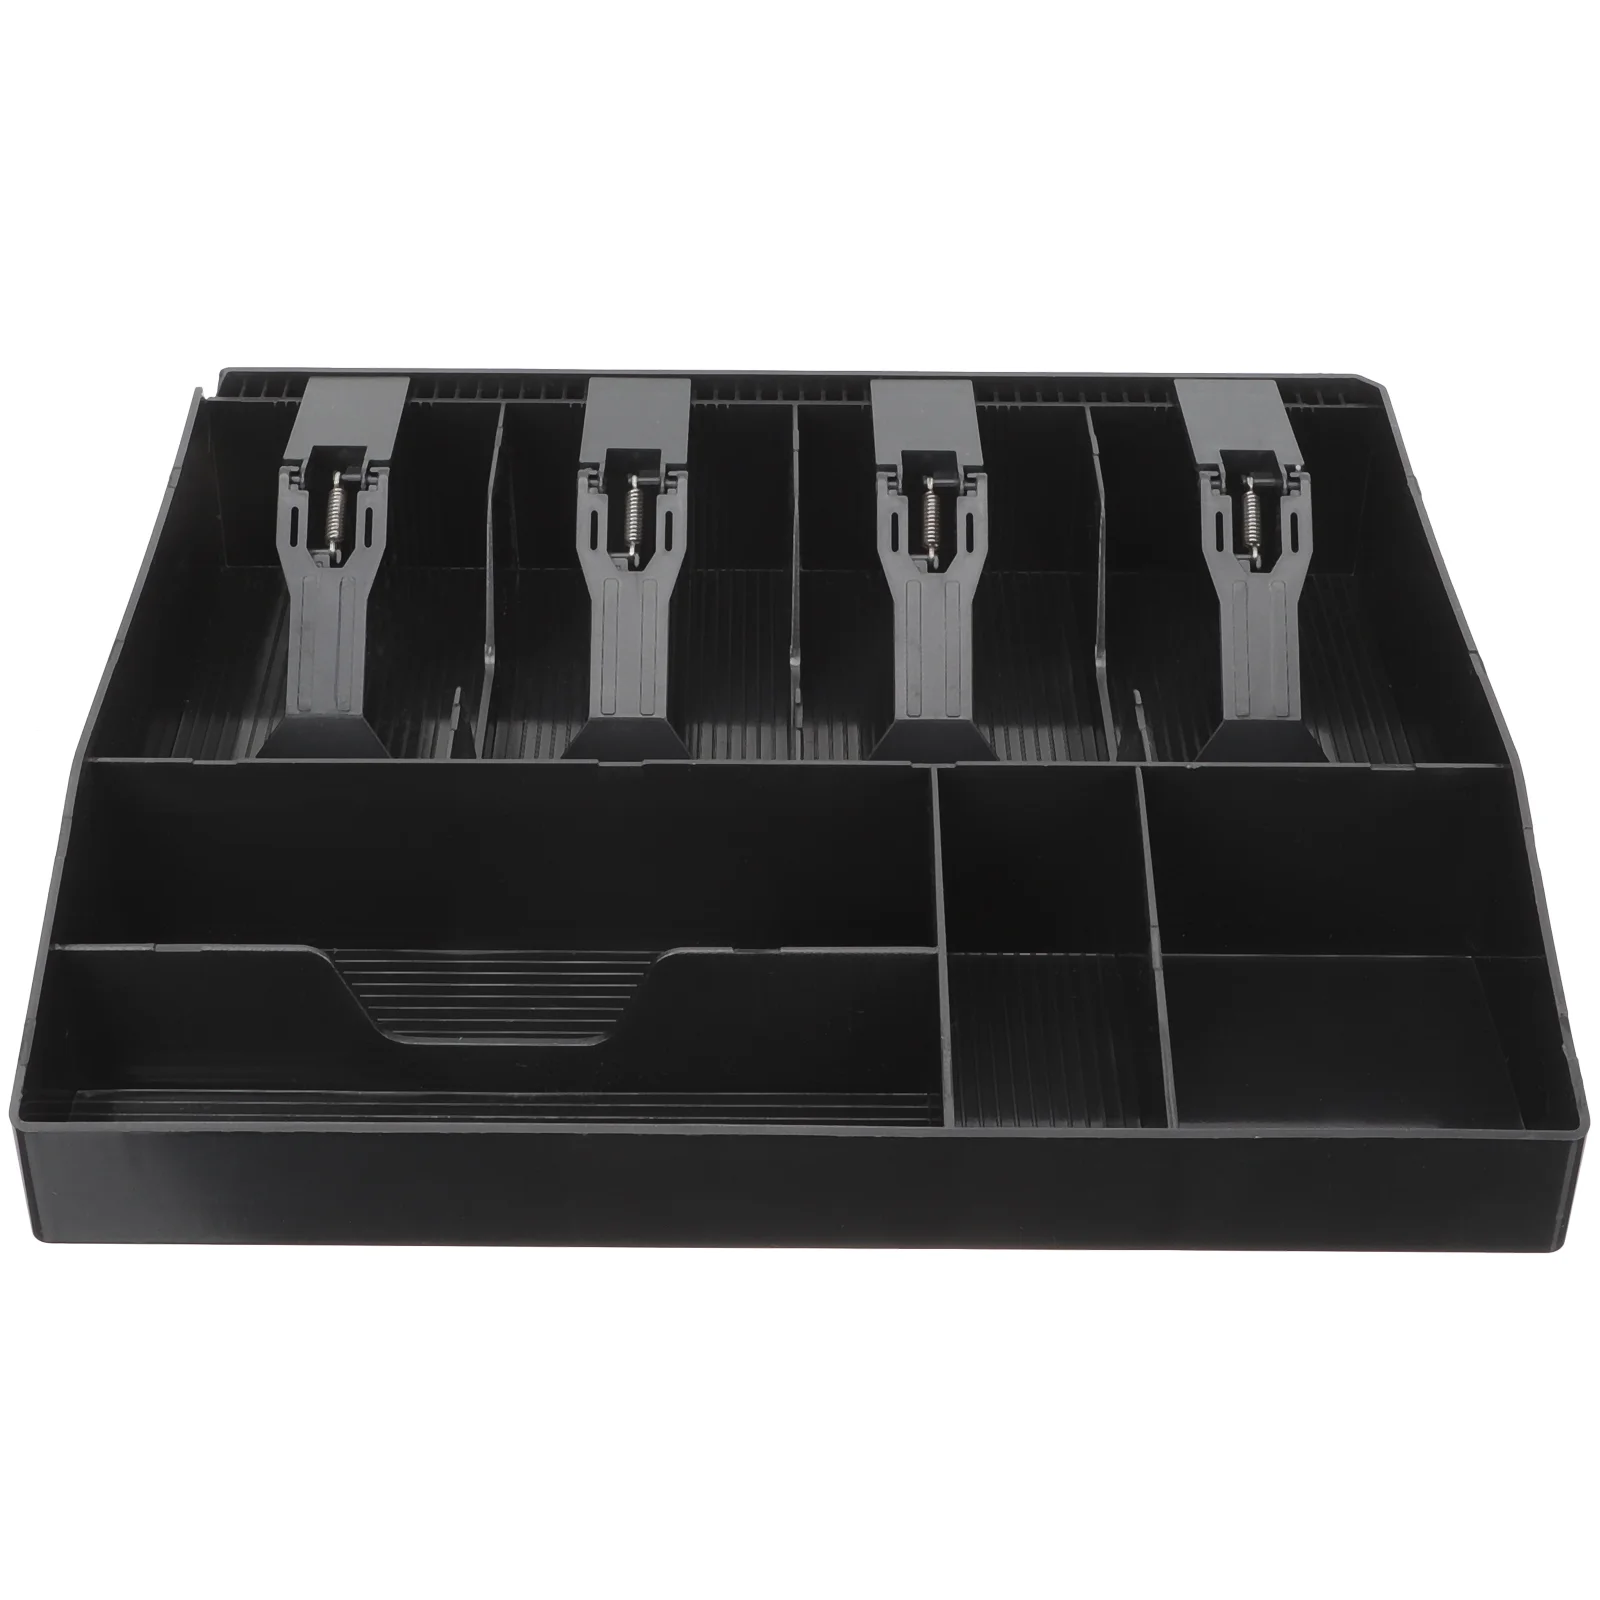 

Supermarket Cash Register Box Money Organizer Multiple Compartment Storage Tray Acrylic Drawer Multi-grid Credit Card Coin